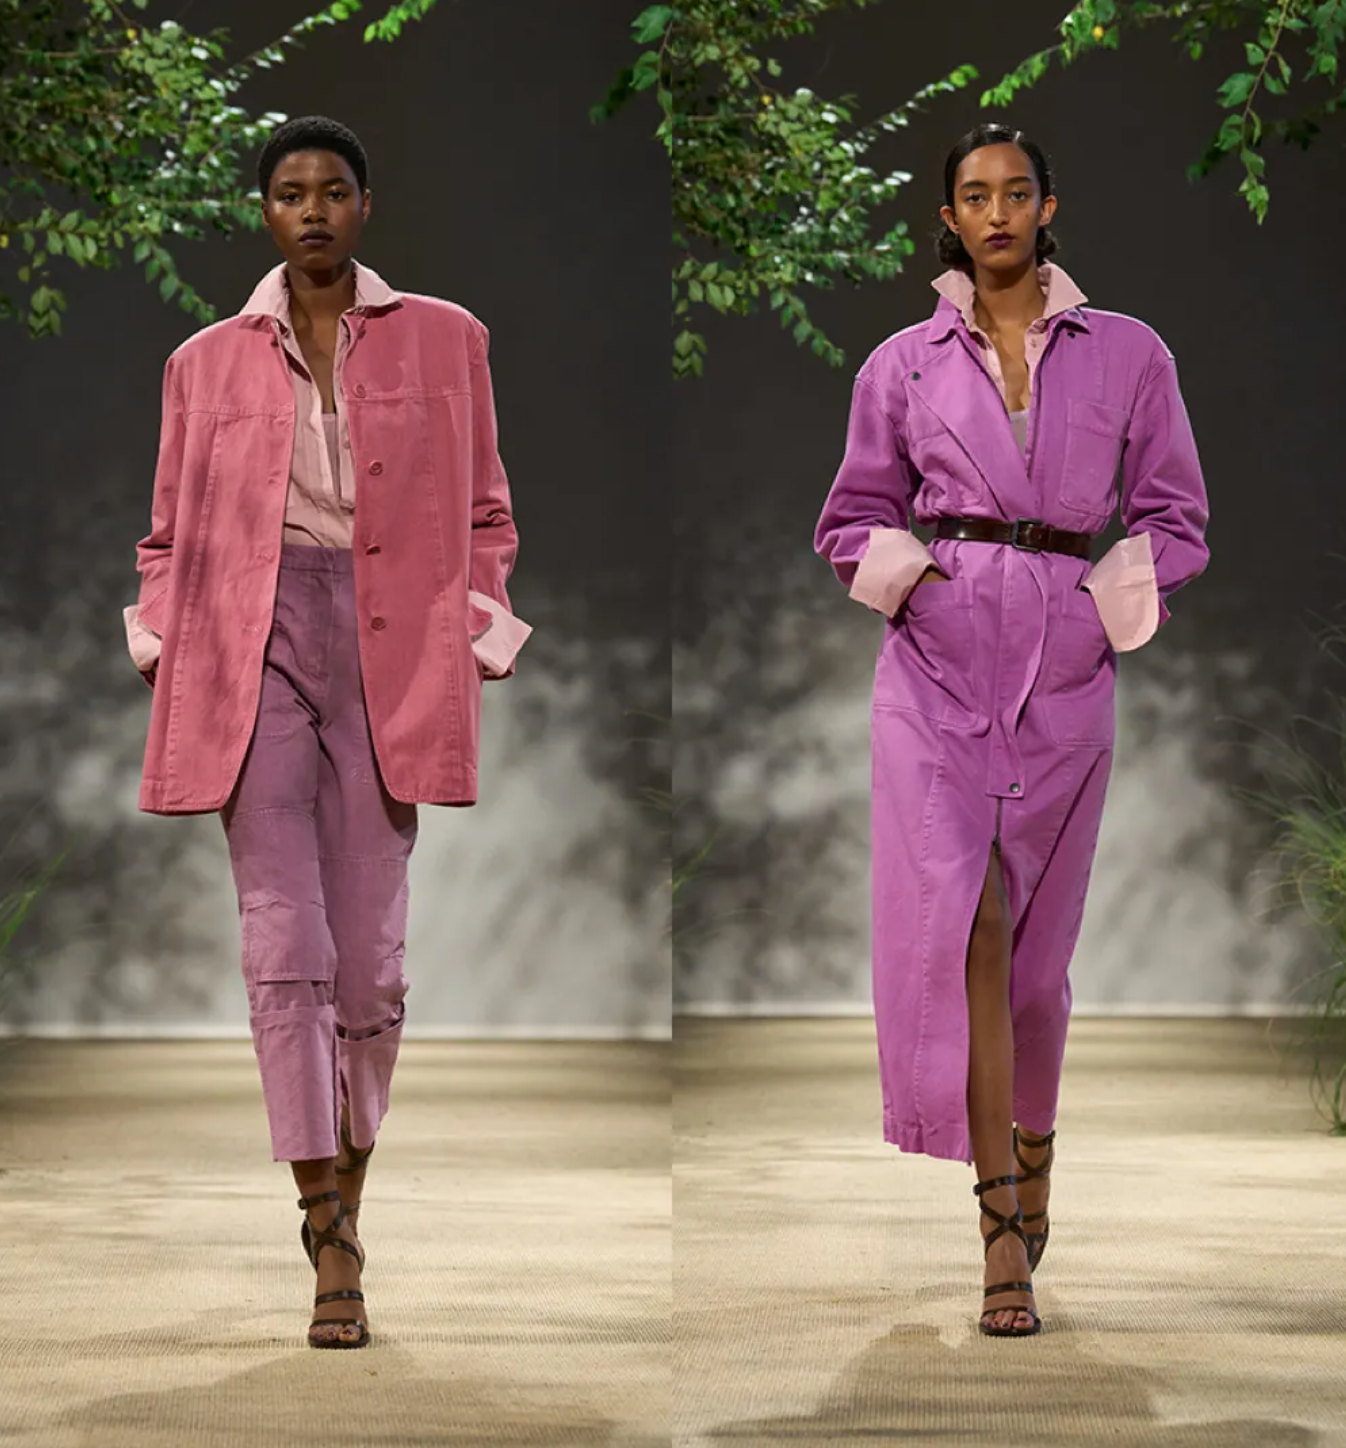 Max Mara's Spring Summer 2024 collection sets an ideal model for “Tyndall’s outfit”.